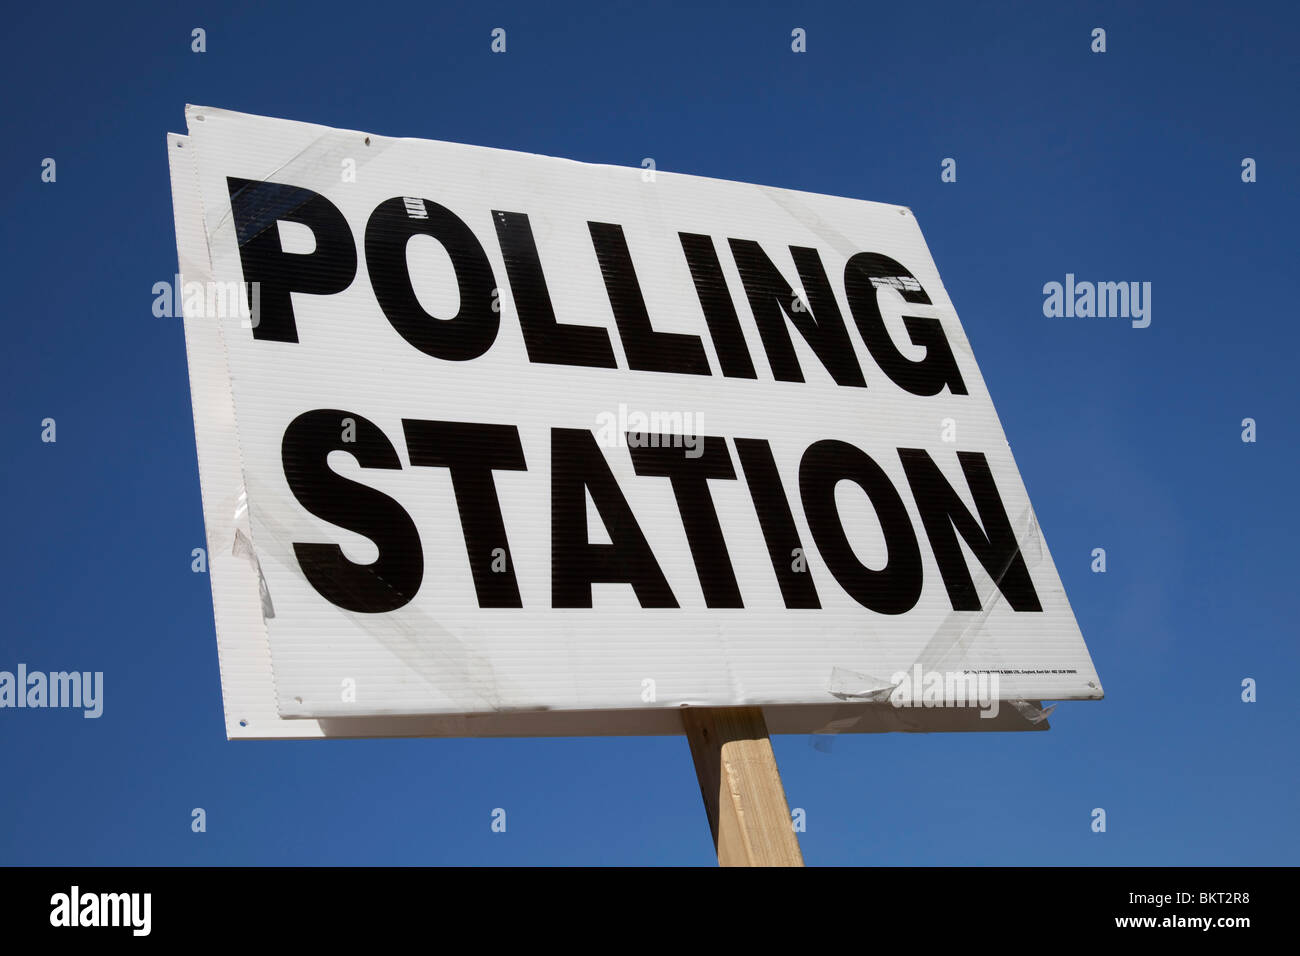 outside-a-polling-station-sign-london-ge